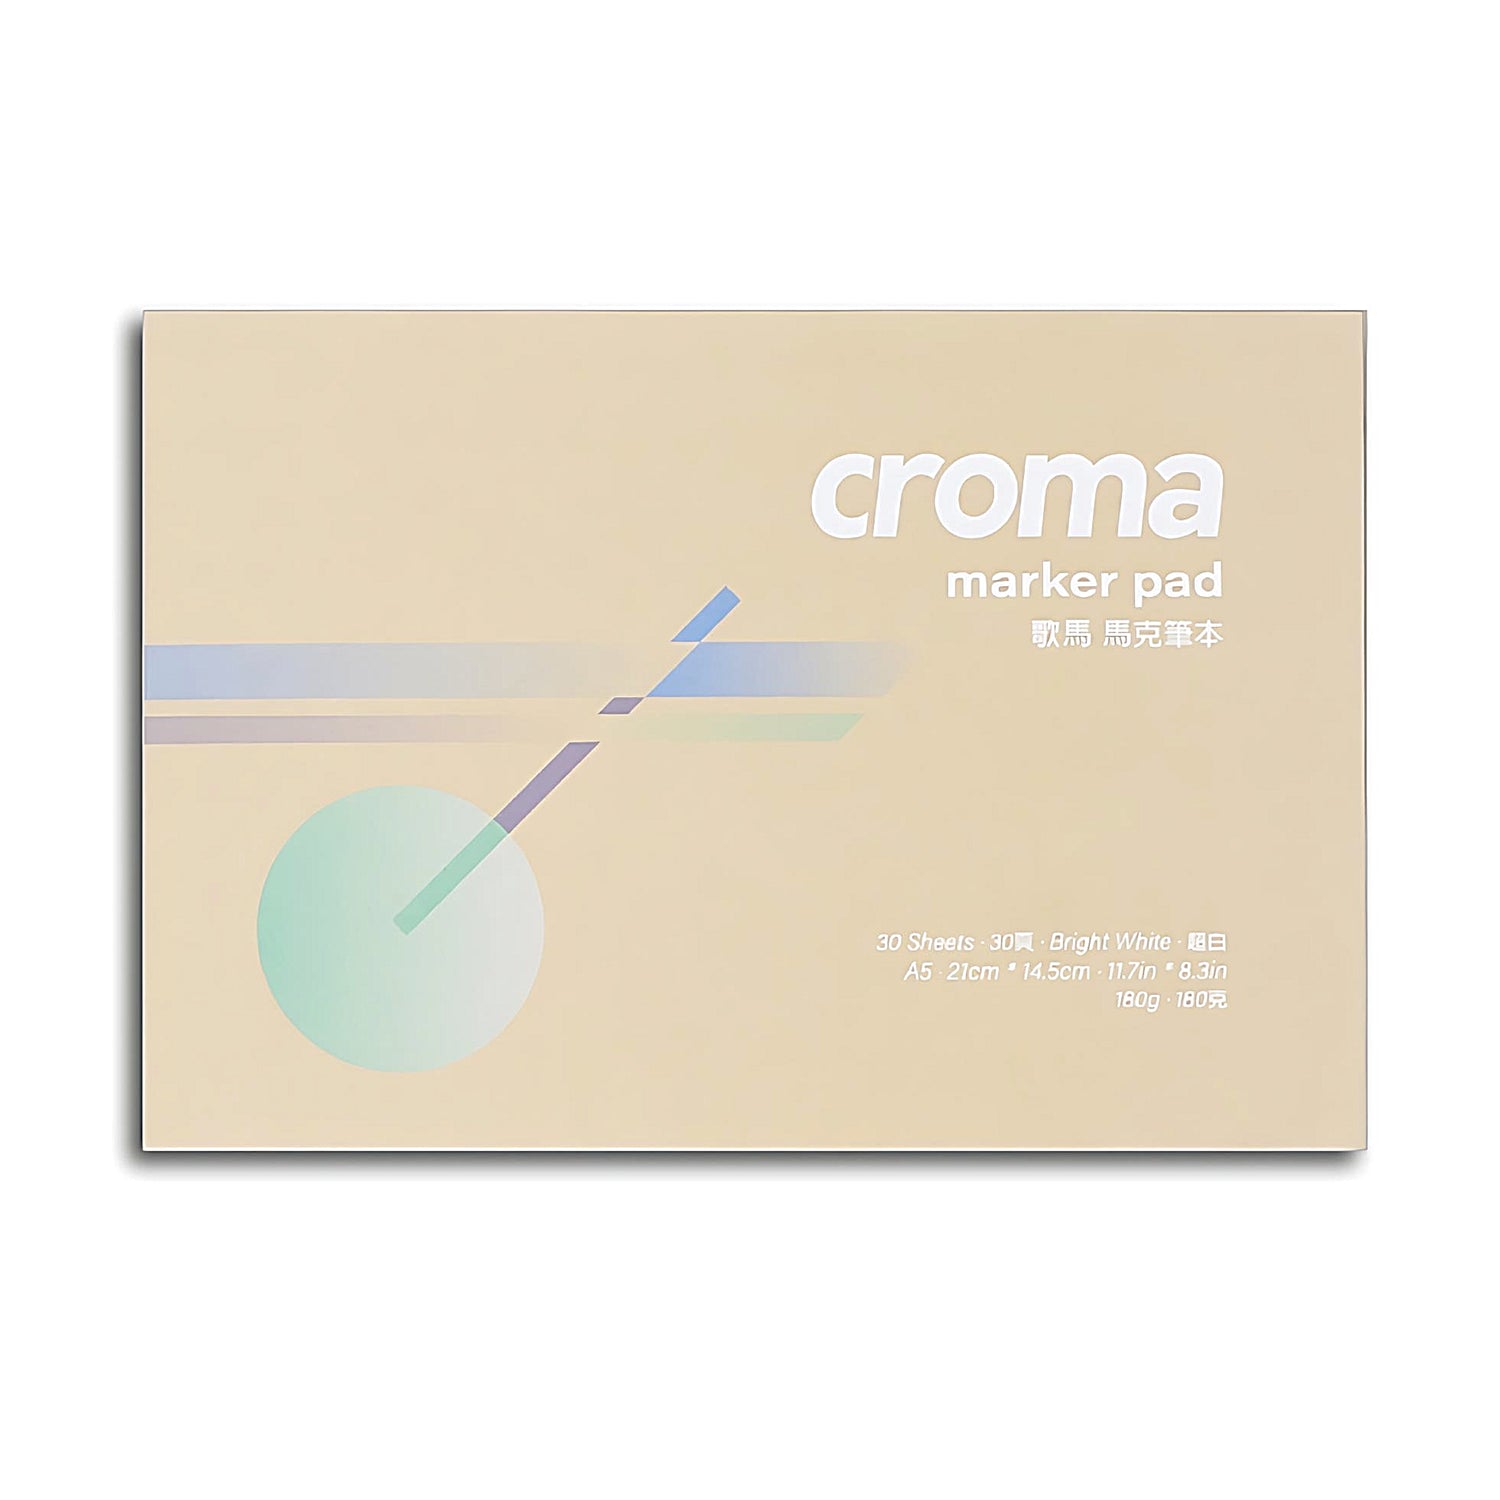 Croma marker pad in A5 format